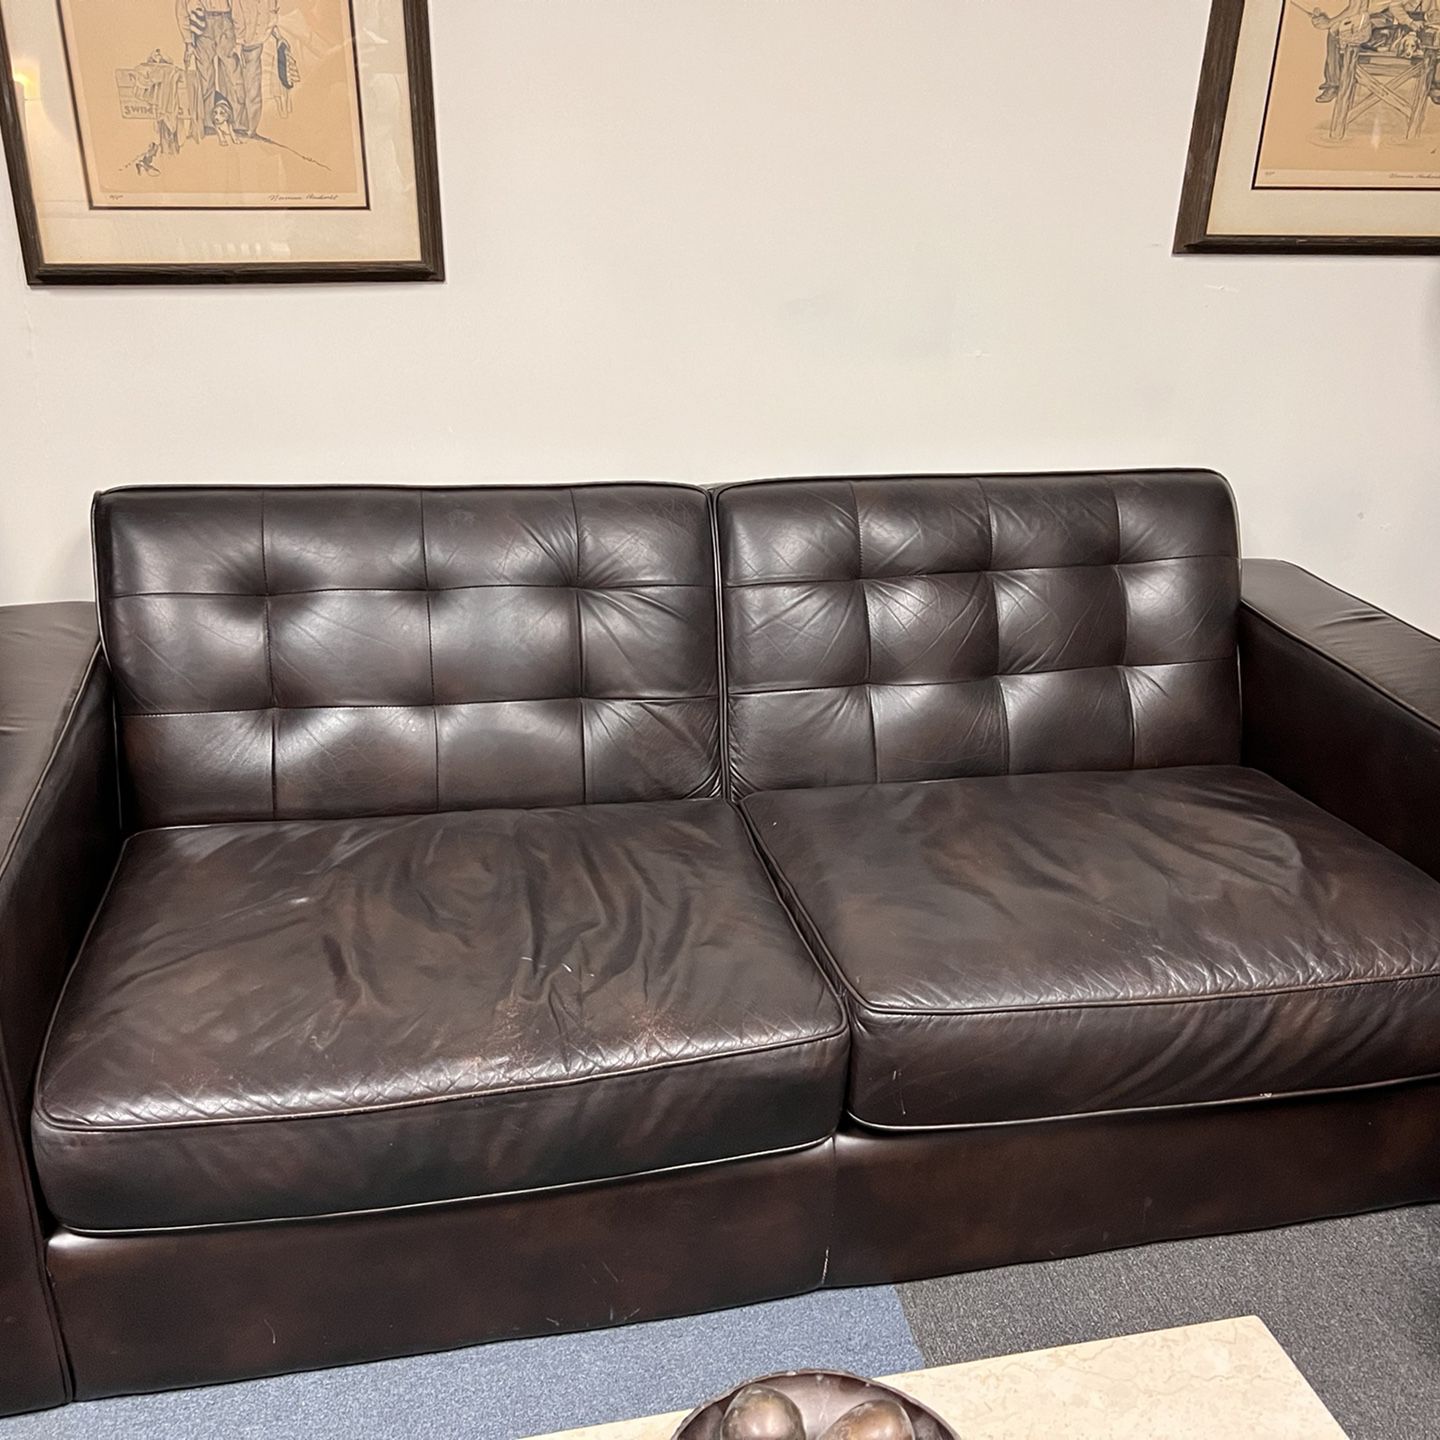 Real Tuscan Leather Couch - Excellent Condition West Elm